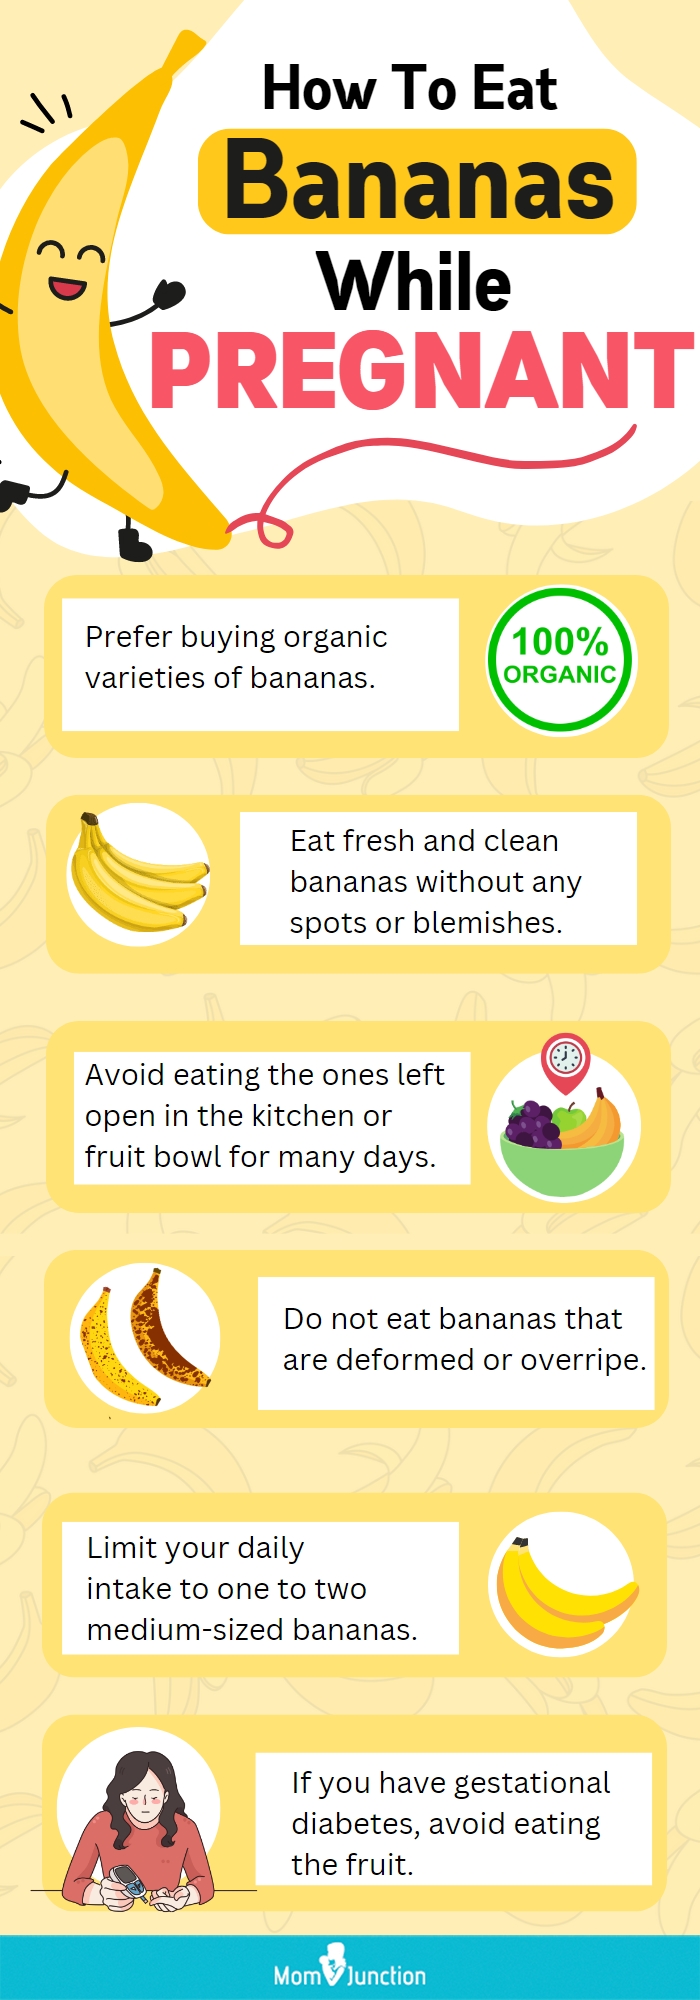 how to eat bananas while pregnant [infographic]